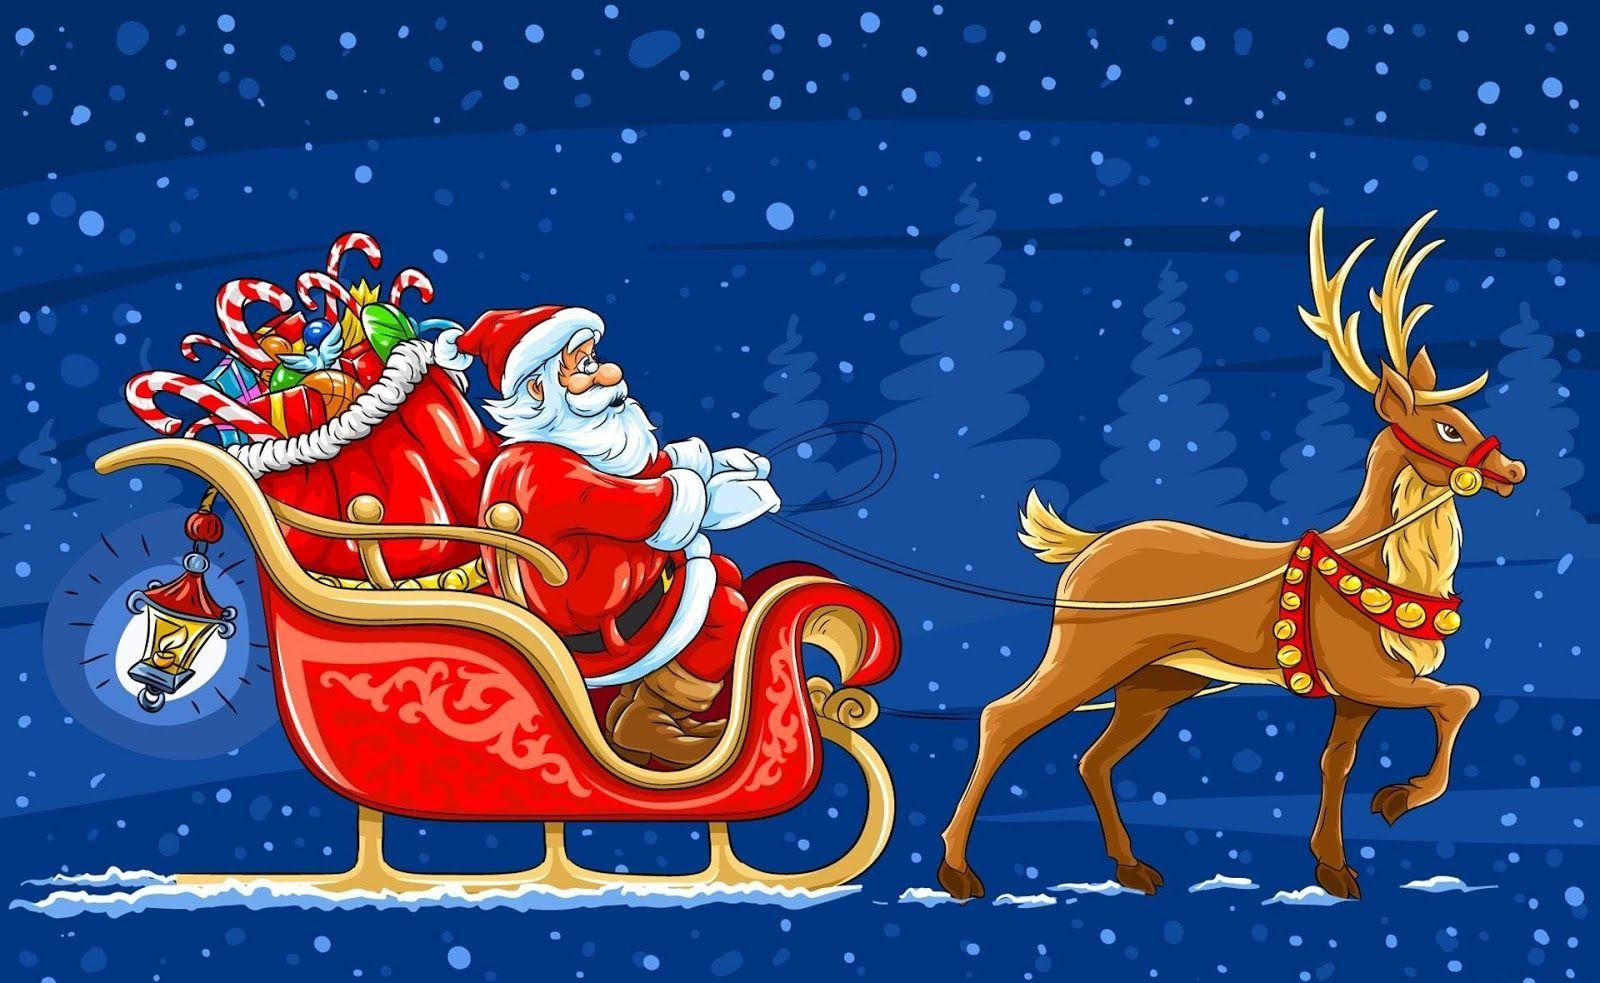 Wallpaper Merry Christmas Images Download Hd : Feel free to download ...